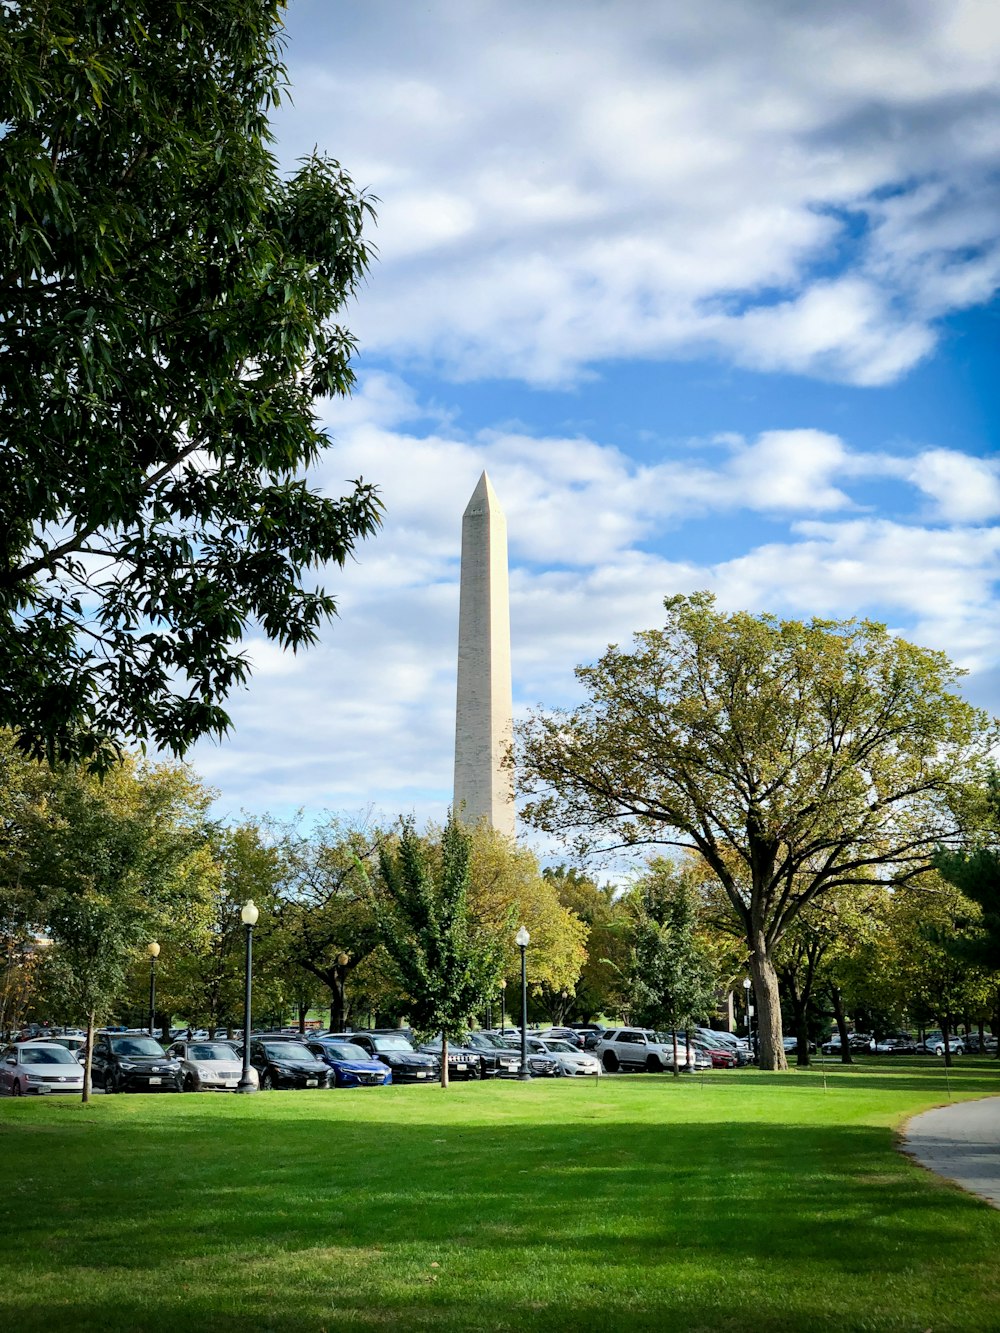 a view of the washington monument from a park